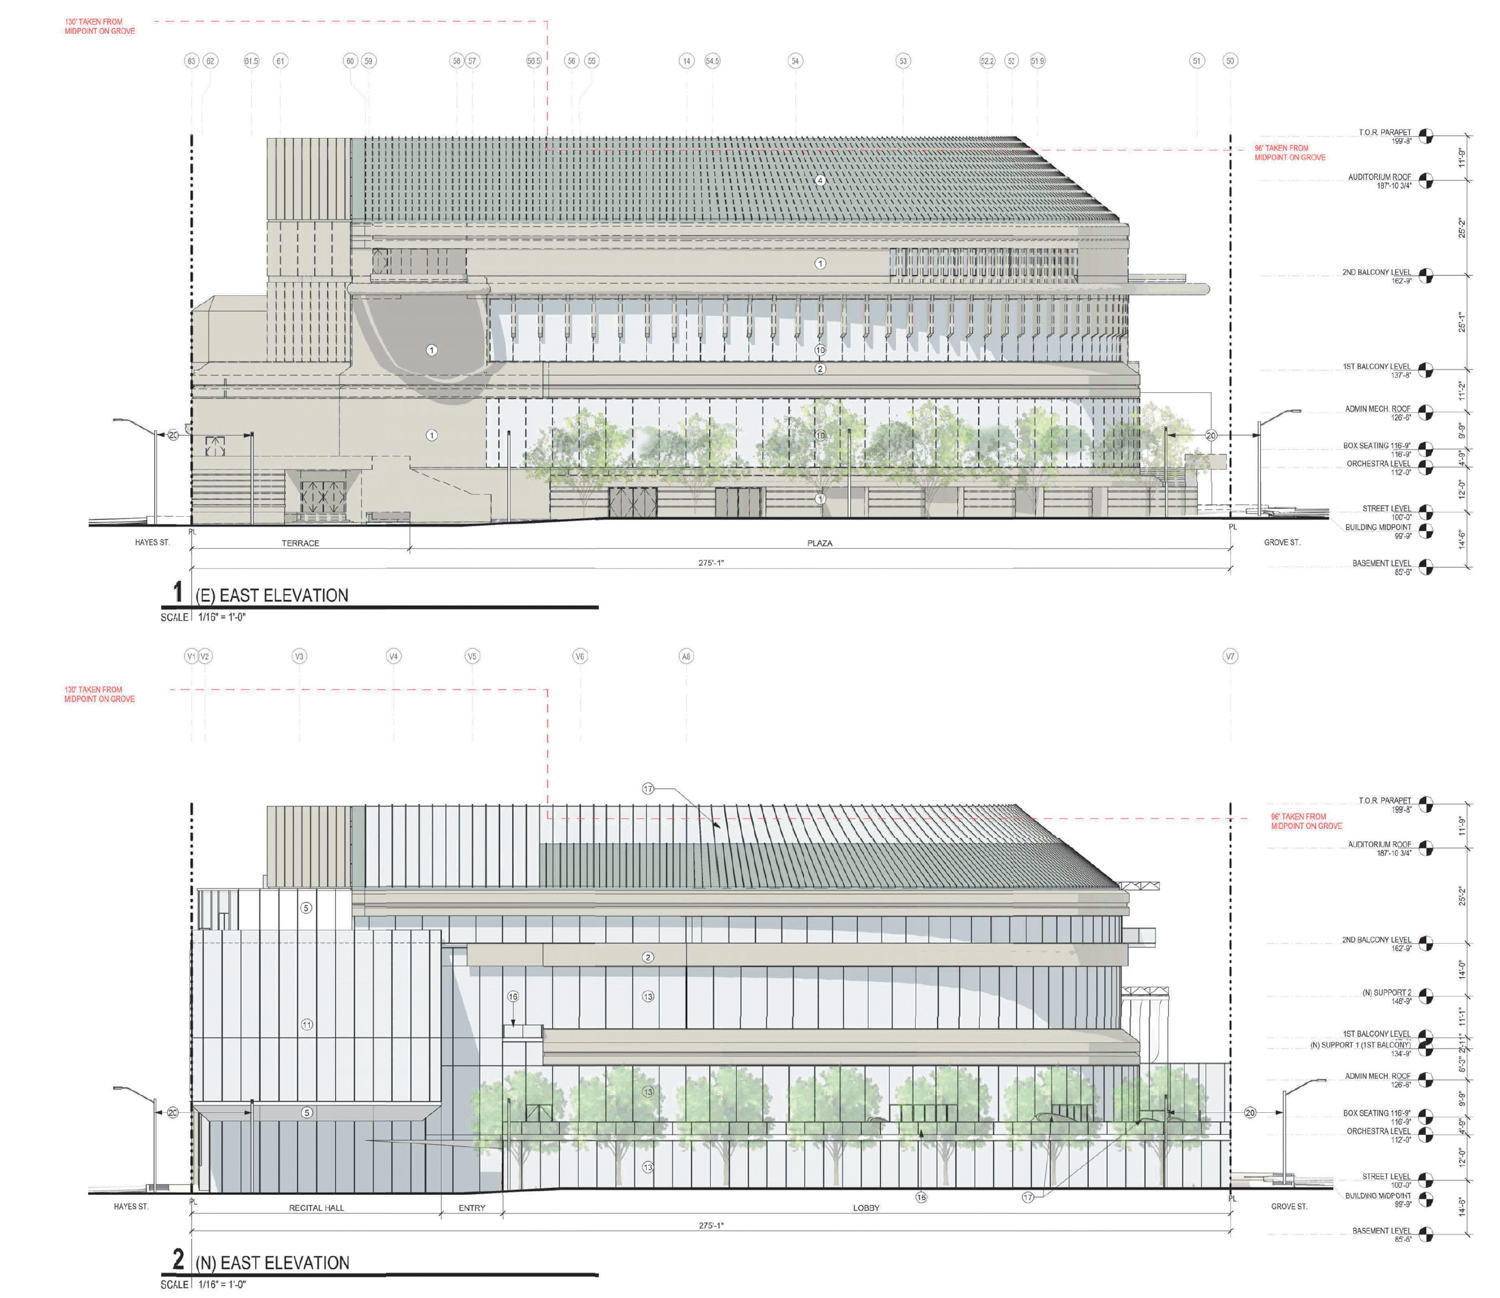 San Francisco Symphony Hall existing (top) and proposed changes (bottom) along the east elevation, illustration by Mark Cavagnero Associates